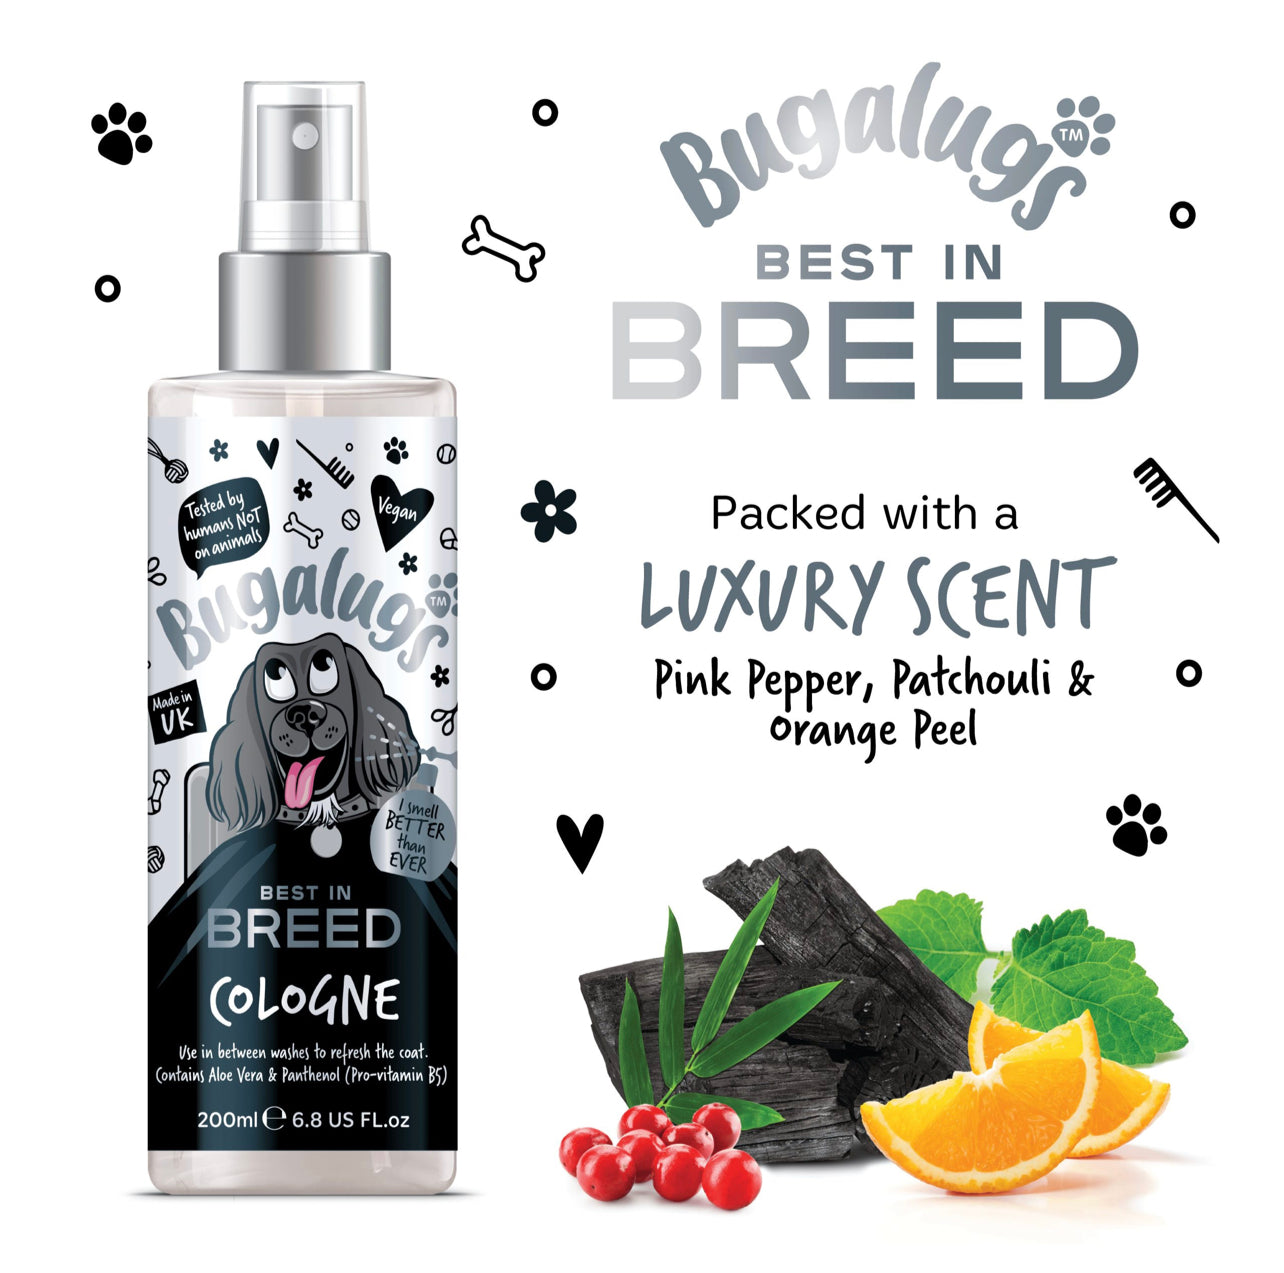 Bugalugs - Best In Breed Cologne